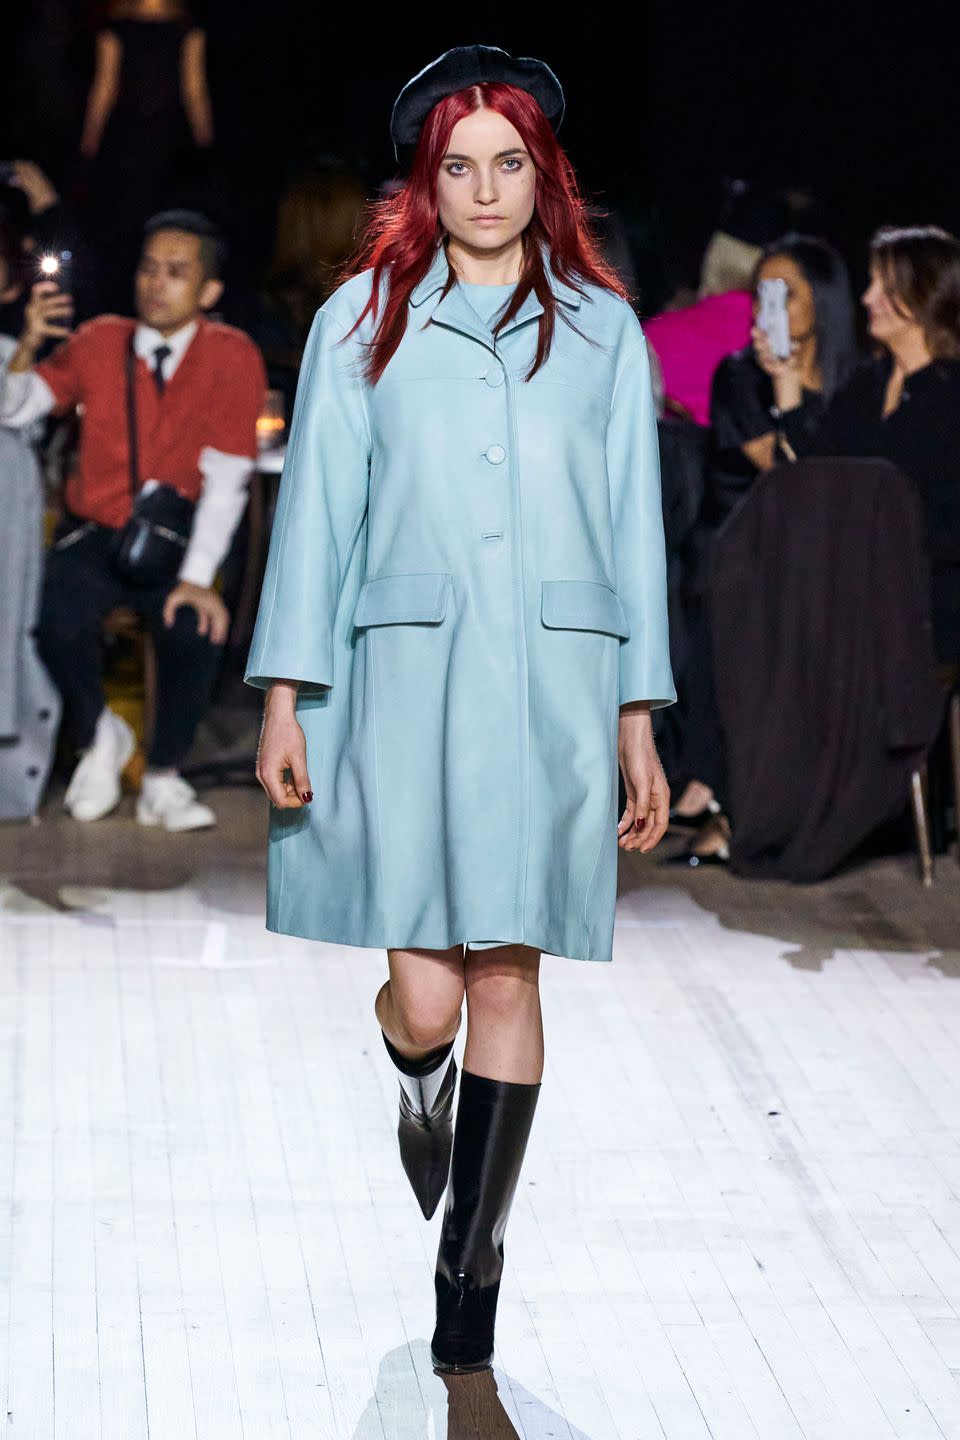 Marc Jacobs' Spirited Fall 2020 Show Was a Tribute to New York